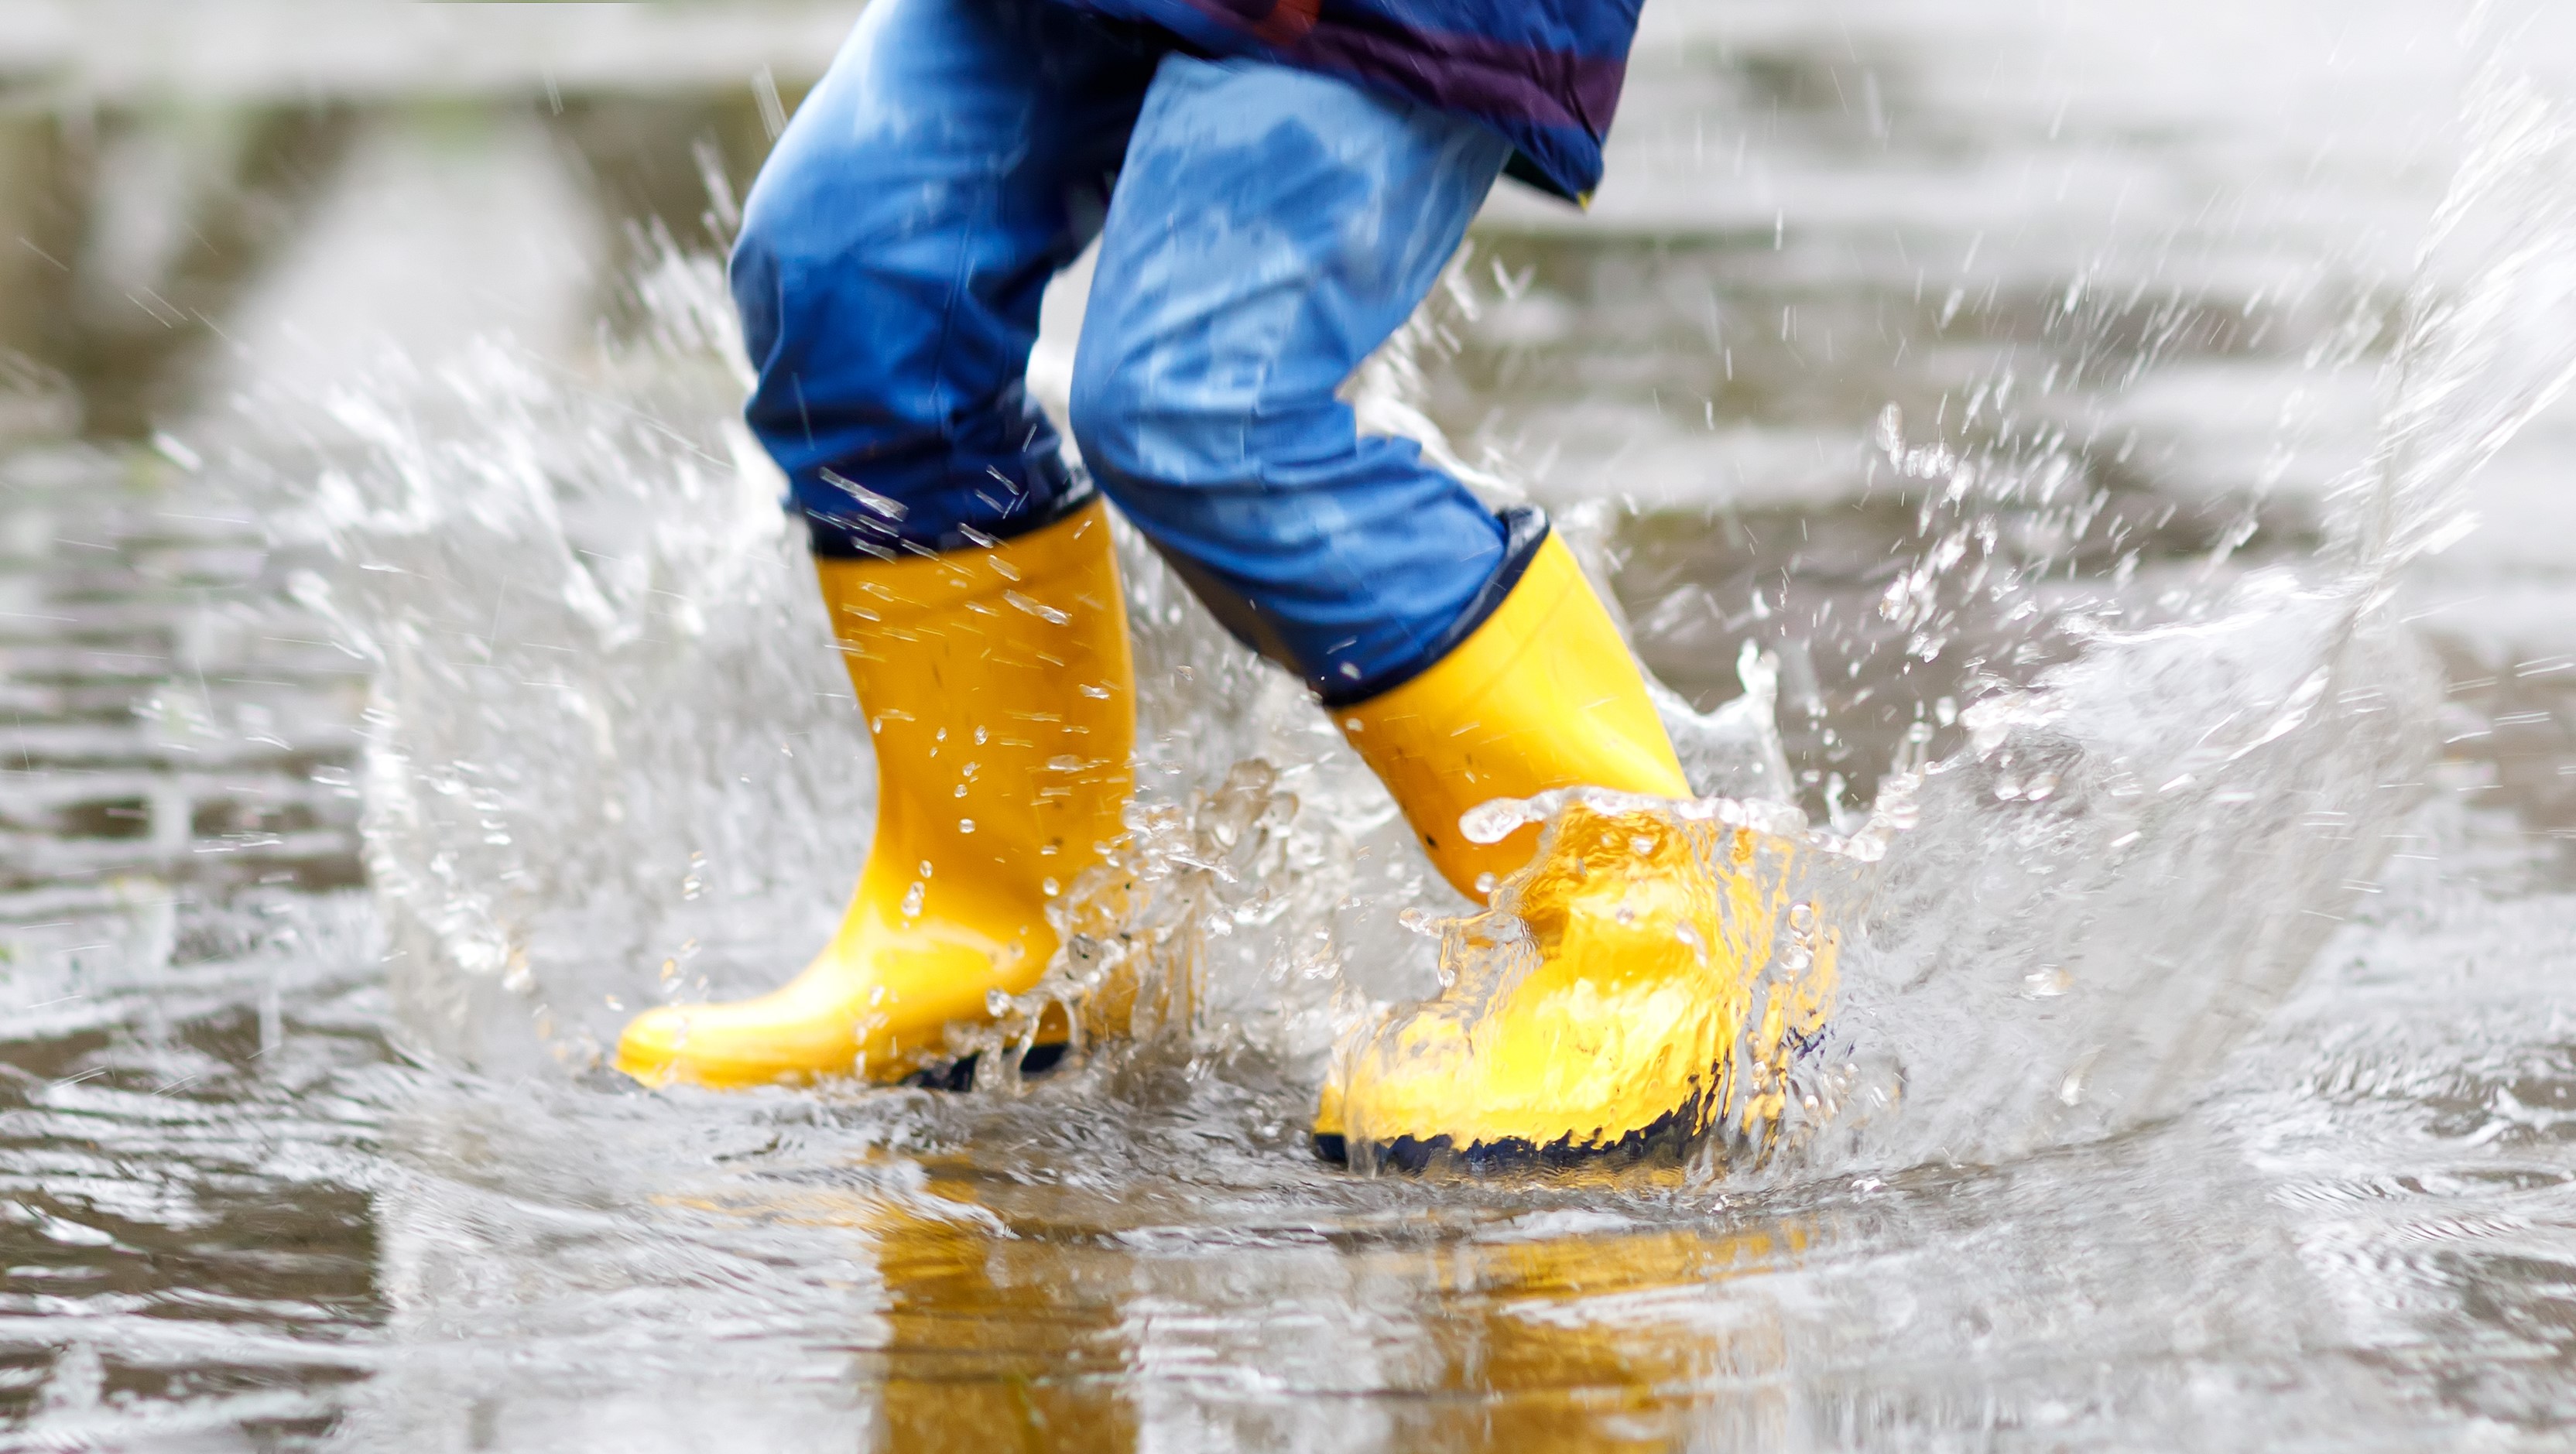 Closeup of a kid splashing in a puddle.